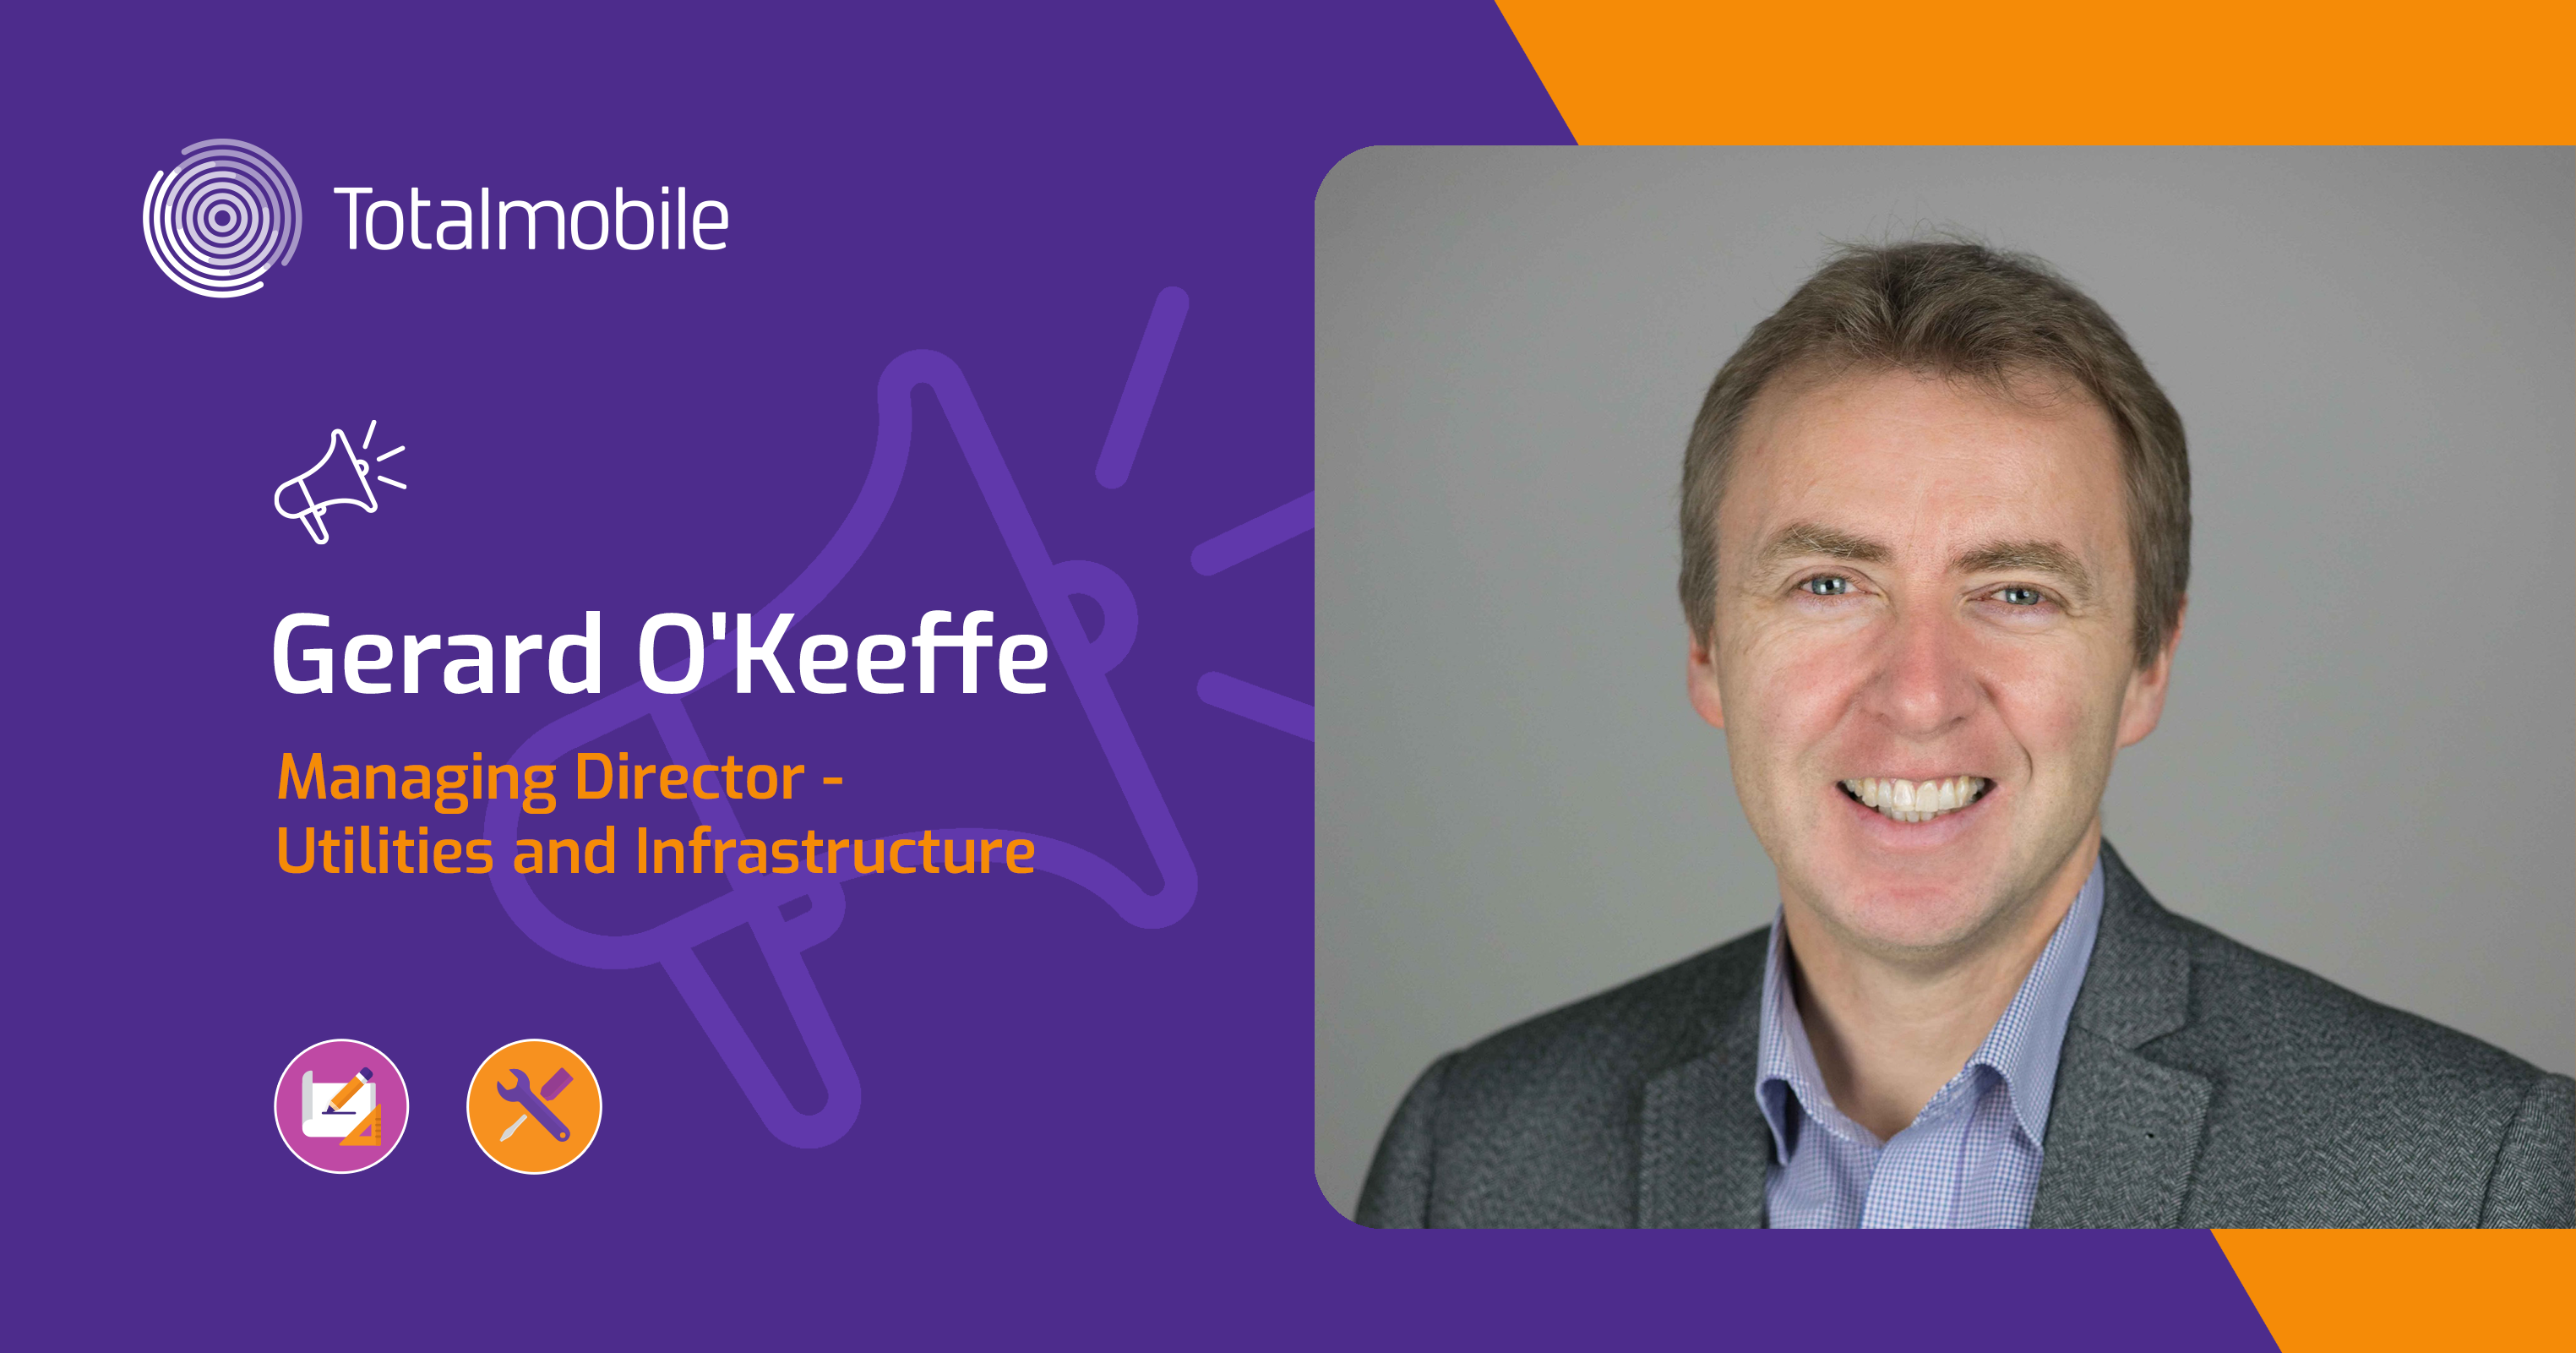 Gerard O’Keeffe Appointed as Totalmobile’s New Managing Director of Utilities and Infrastructure Business